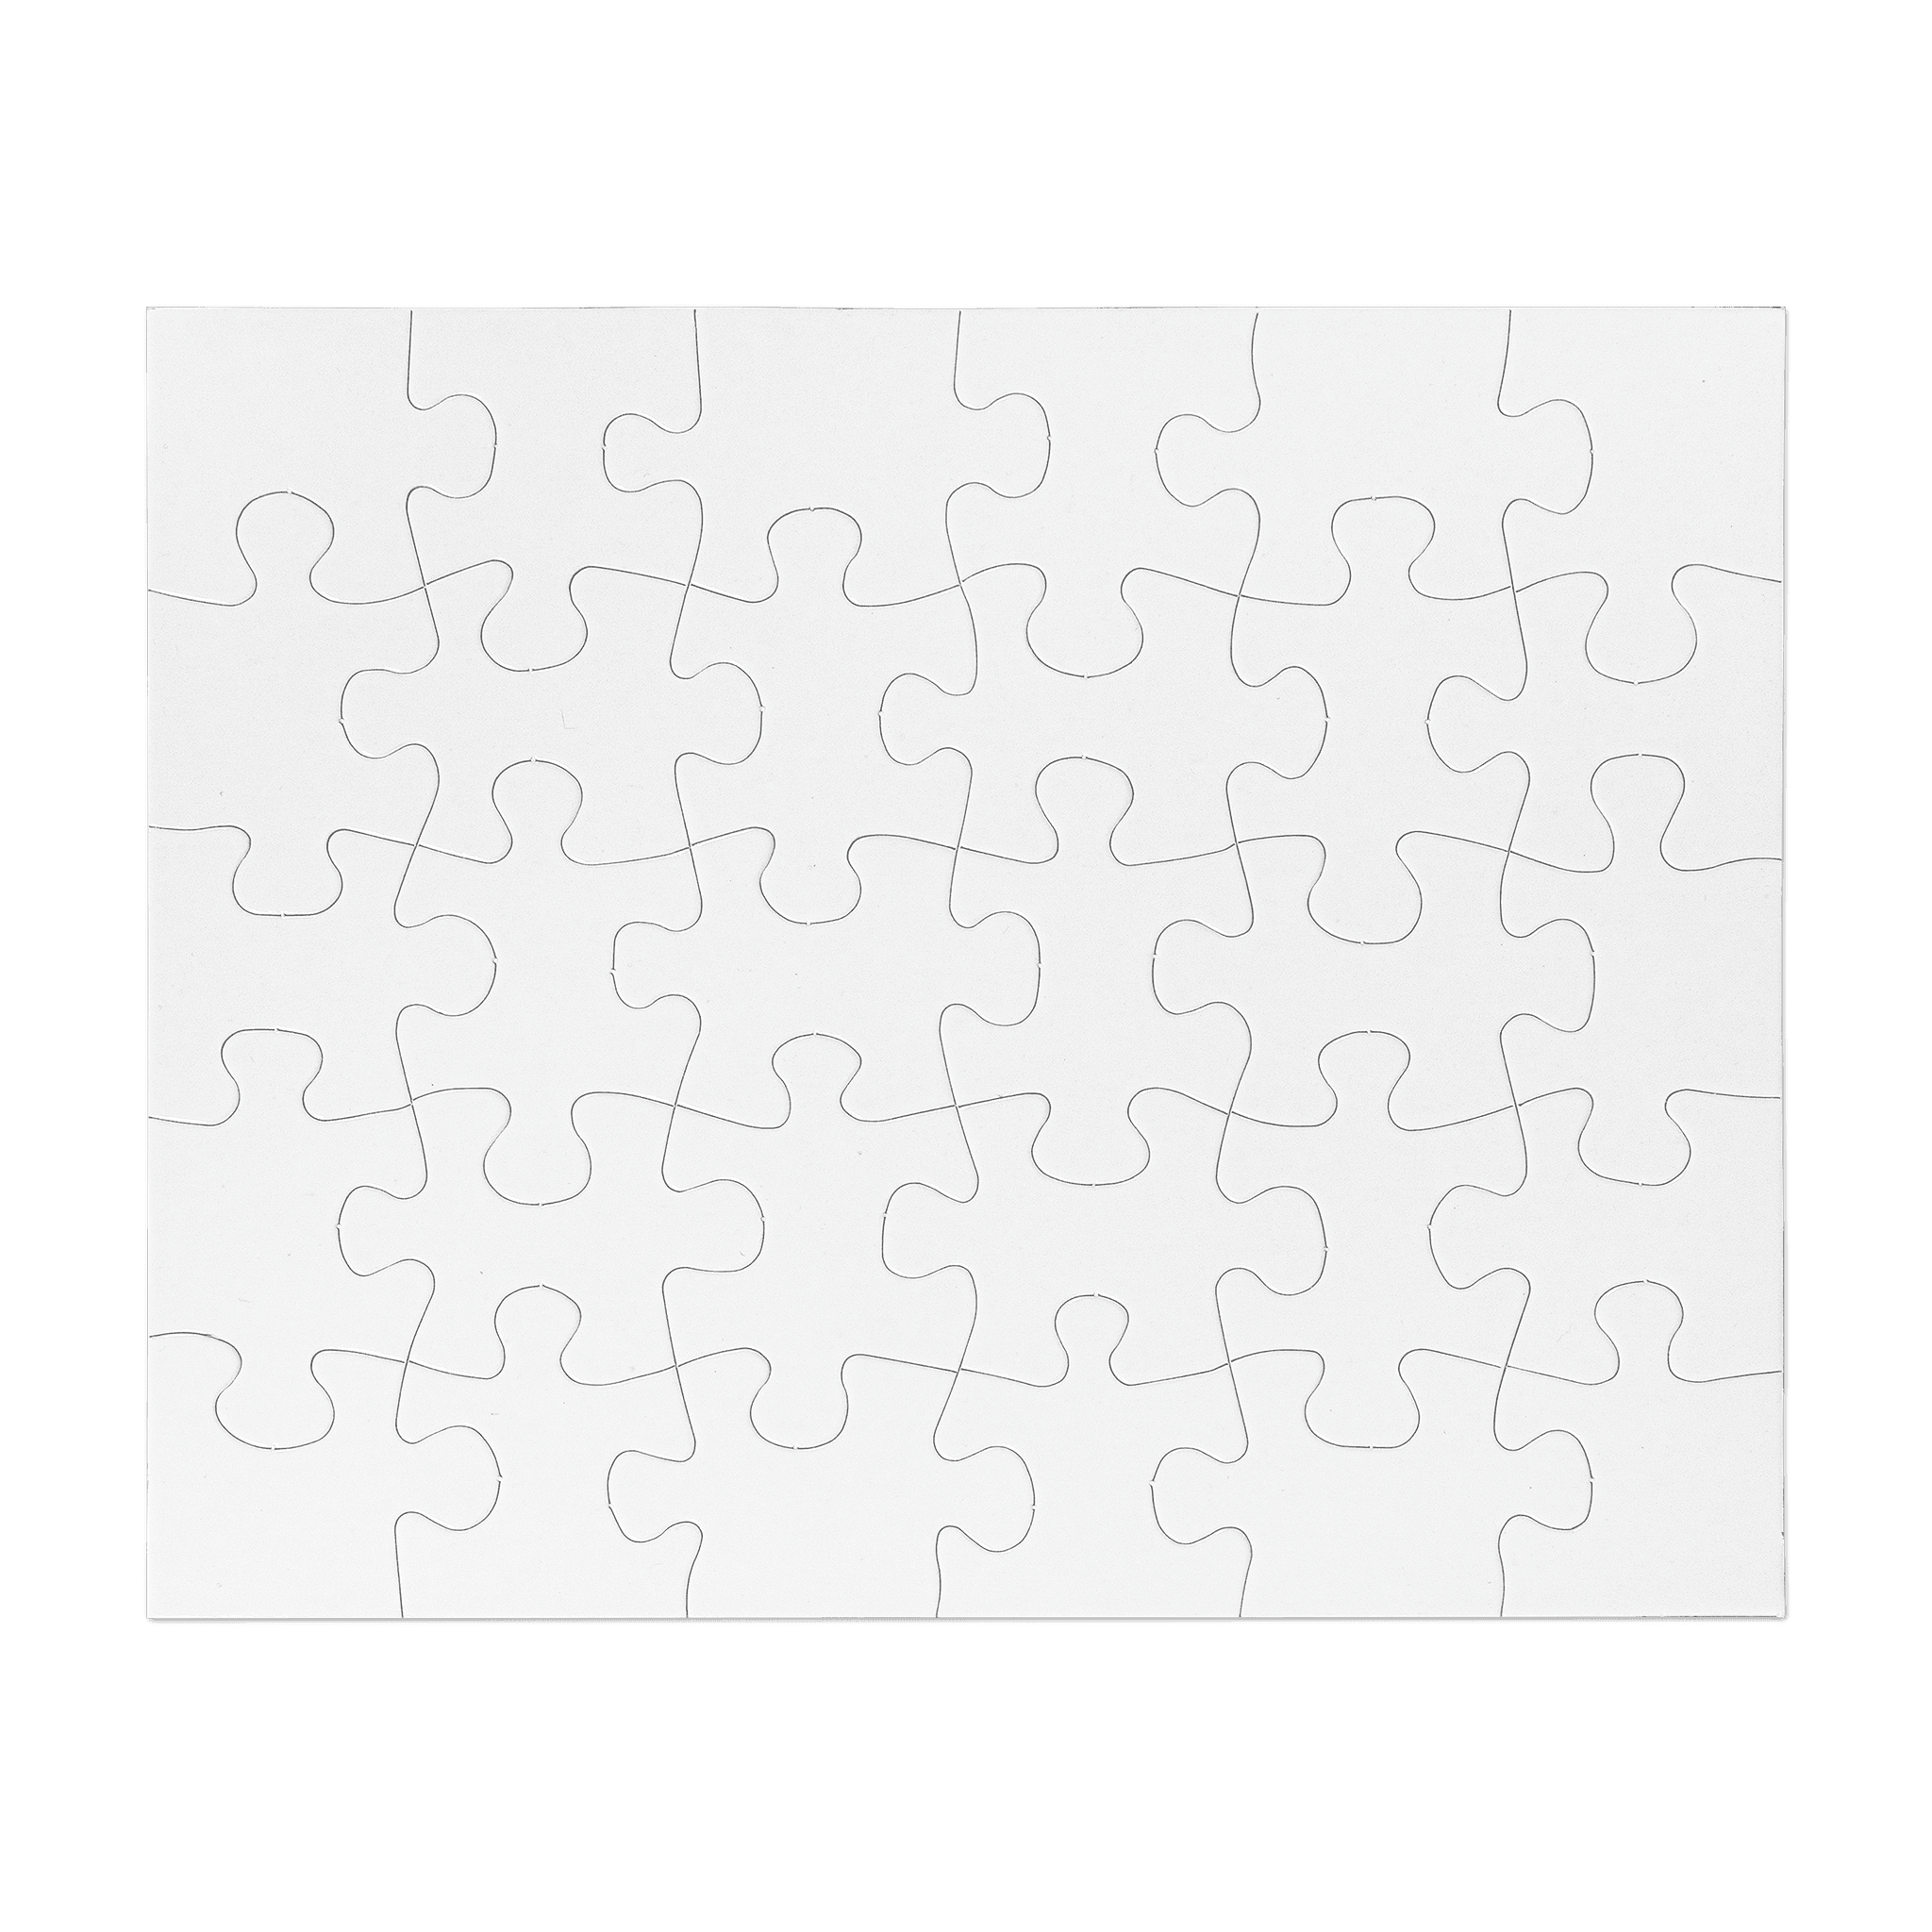 25 Jigsaw puzzle blank template, Stock image